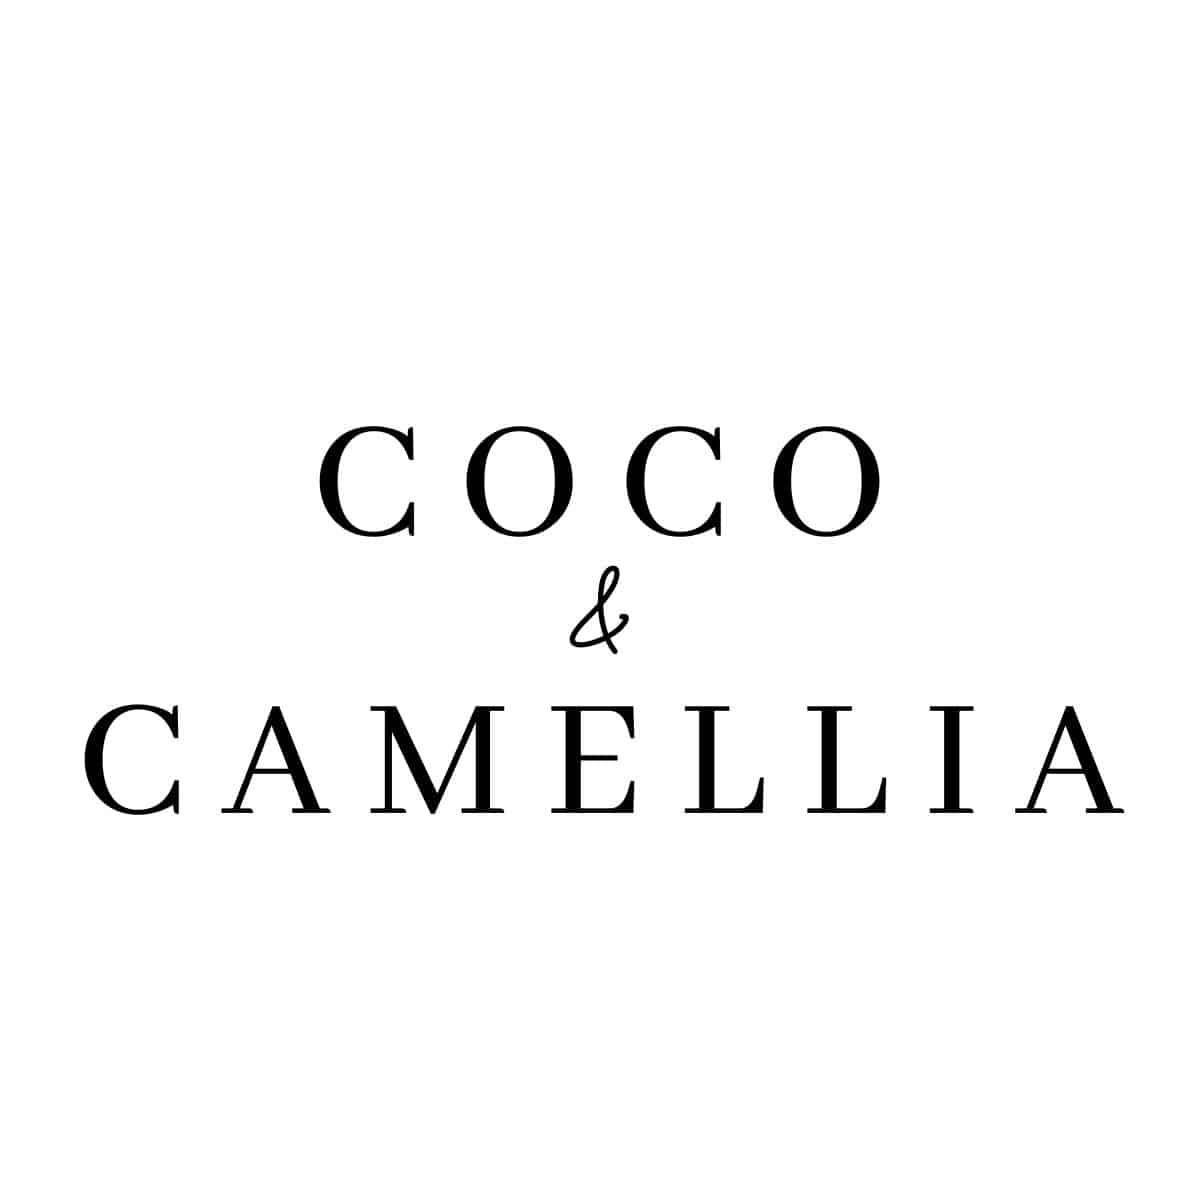 Simple Recipes Inspired by Nature | Coco and Camellia